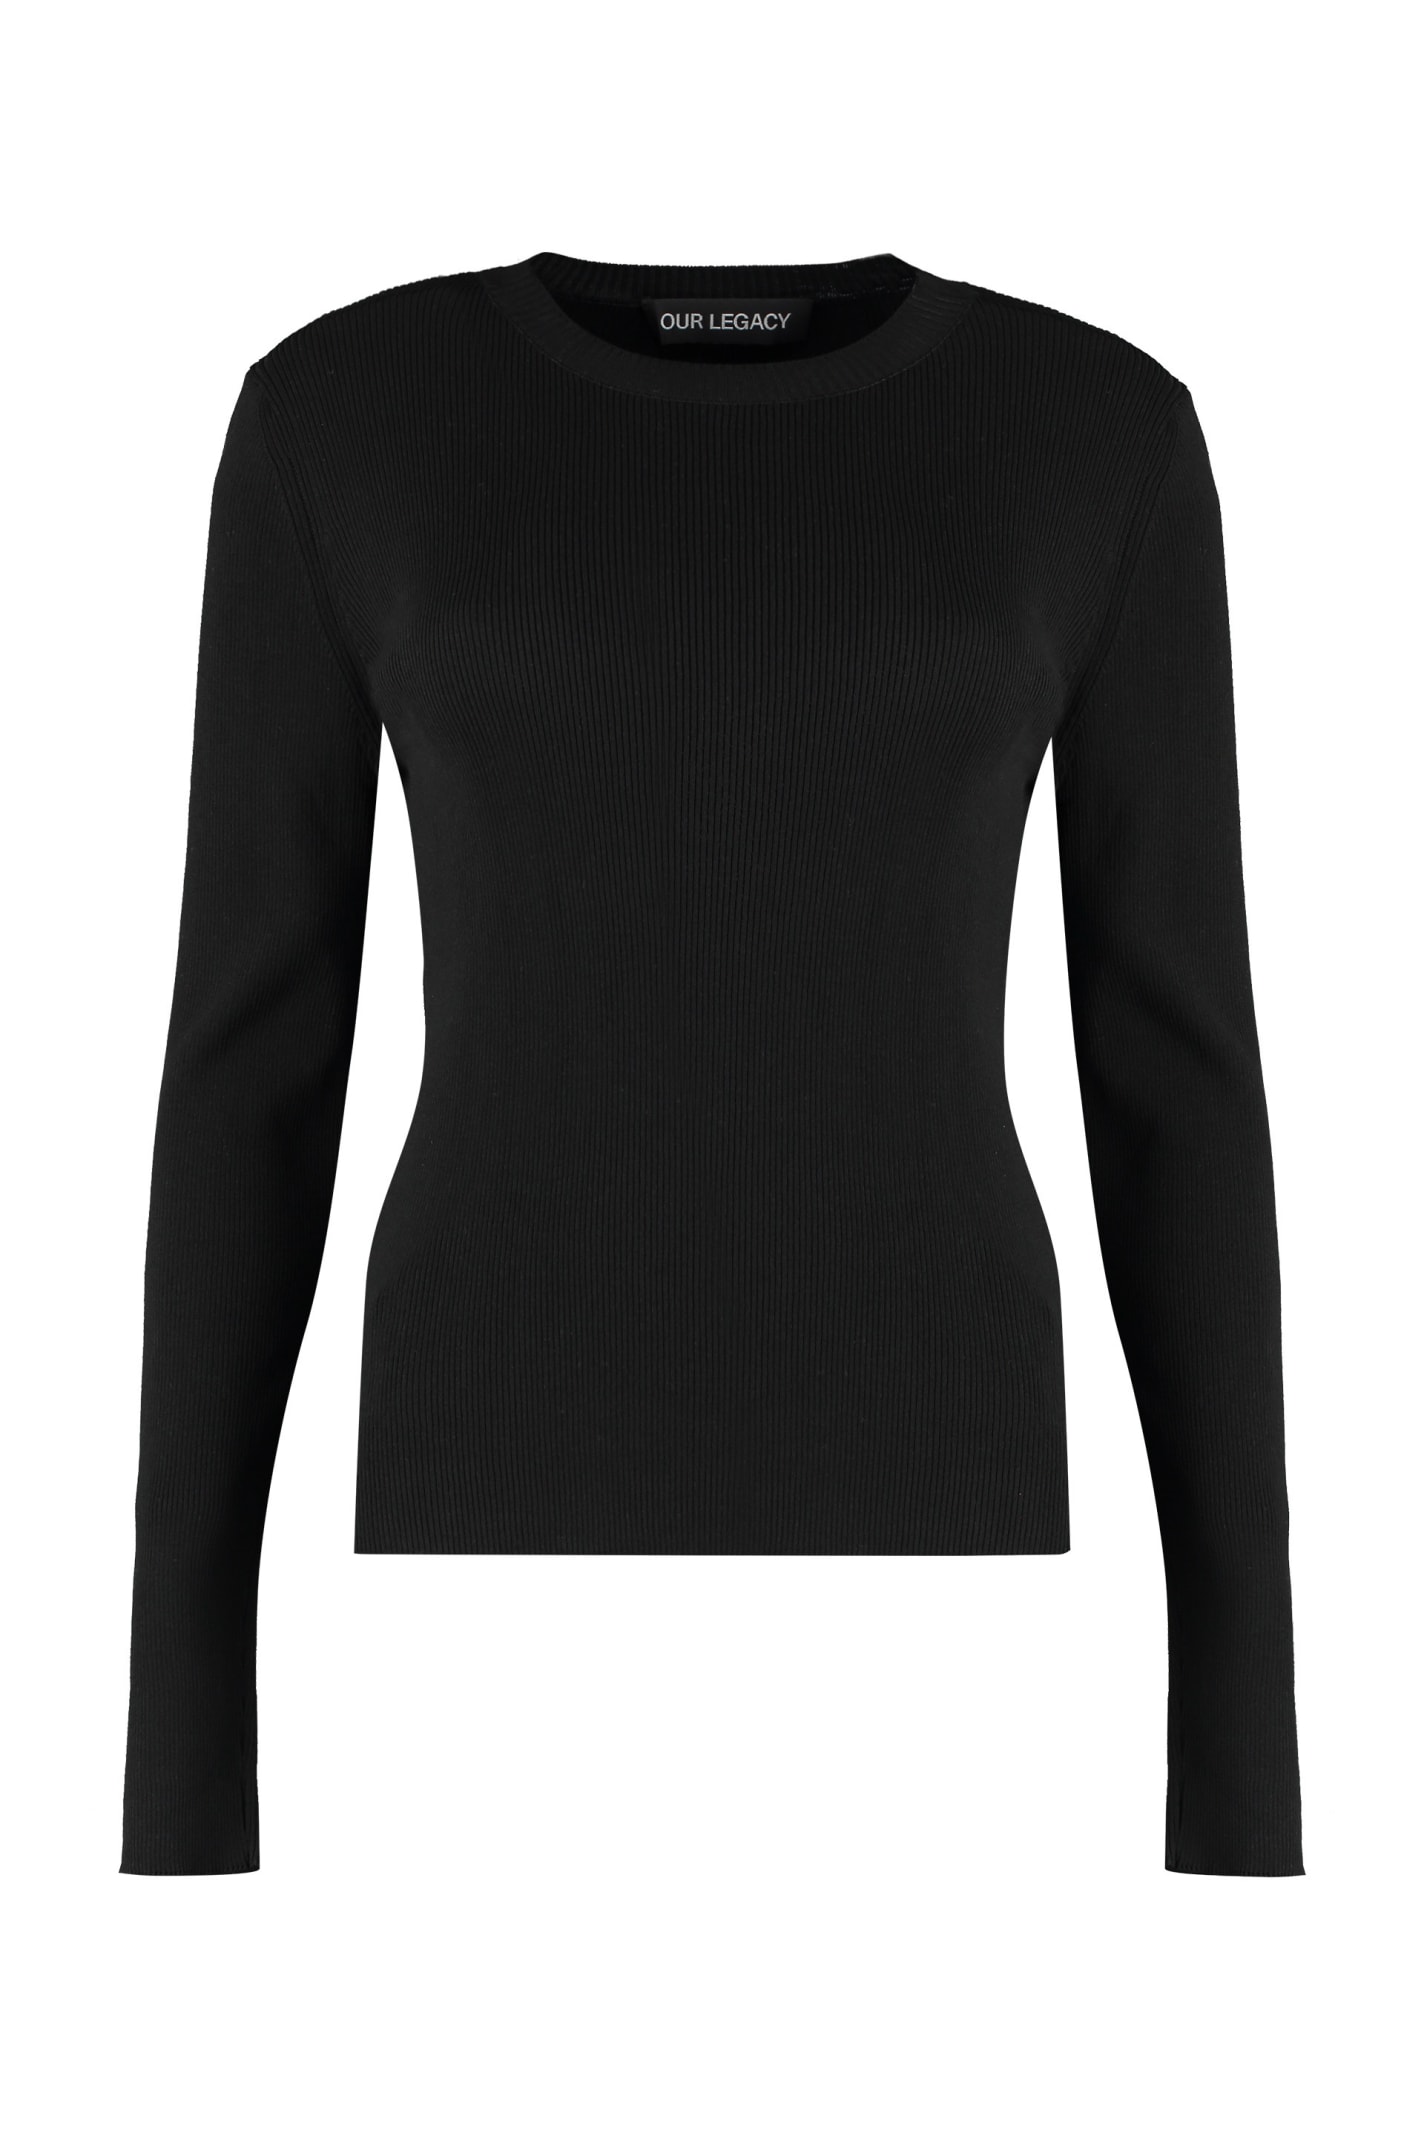 Shop Our Legacy Compact Long Sleeve T-shirt In Black